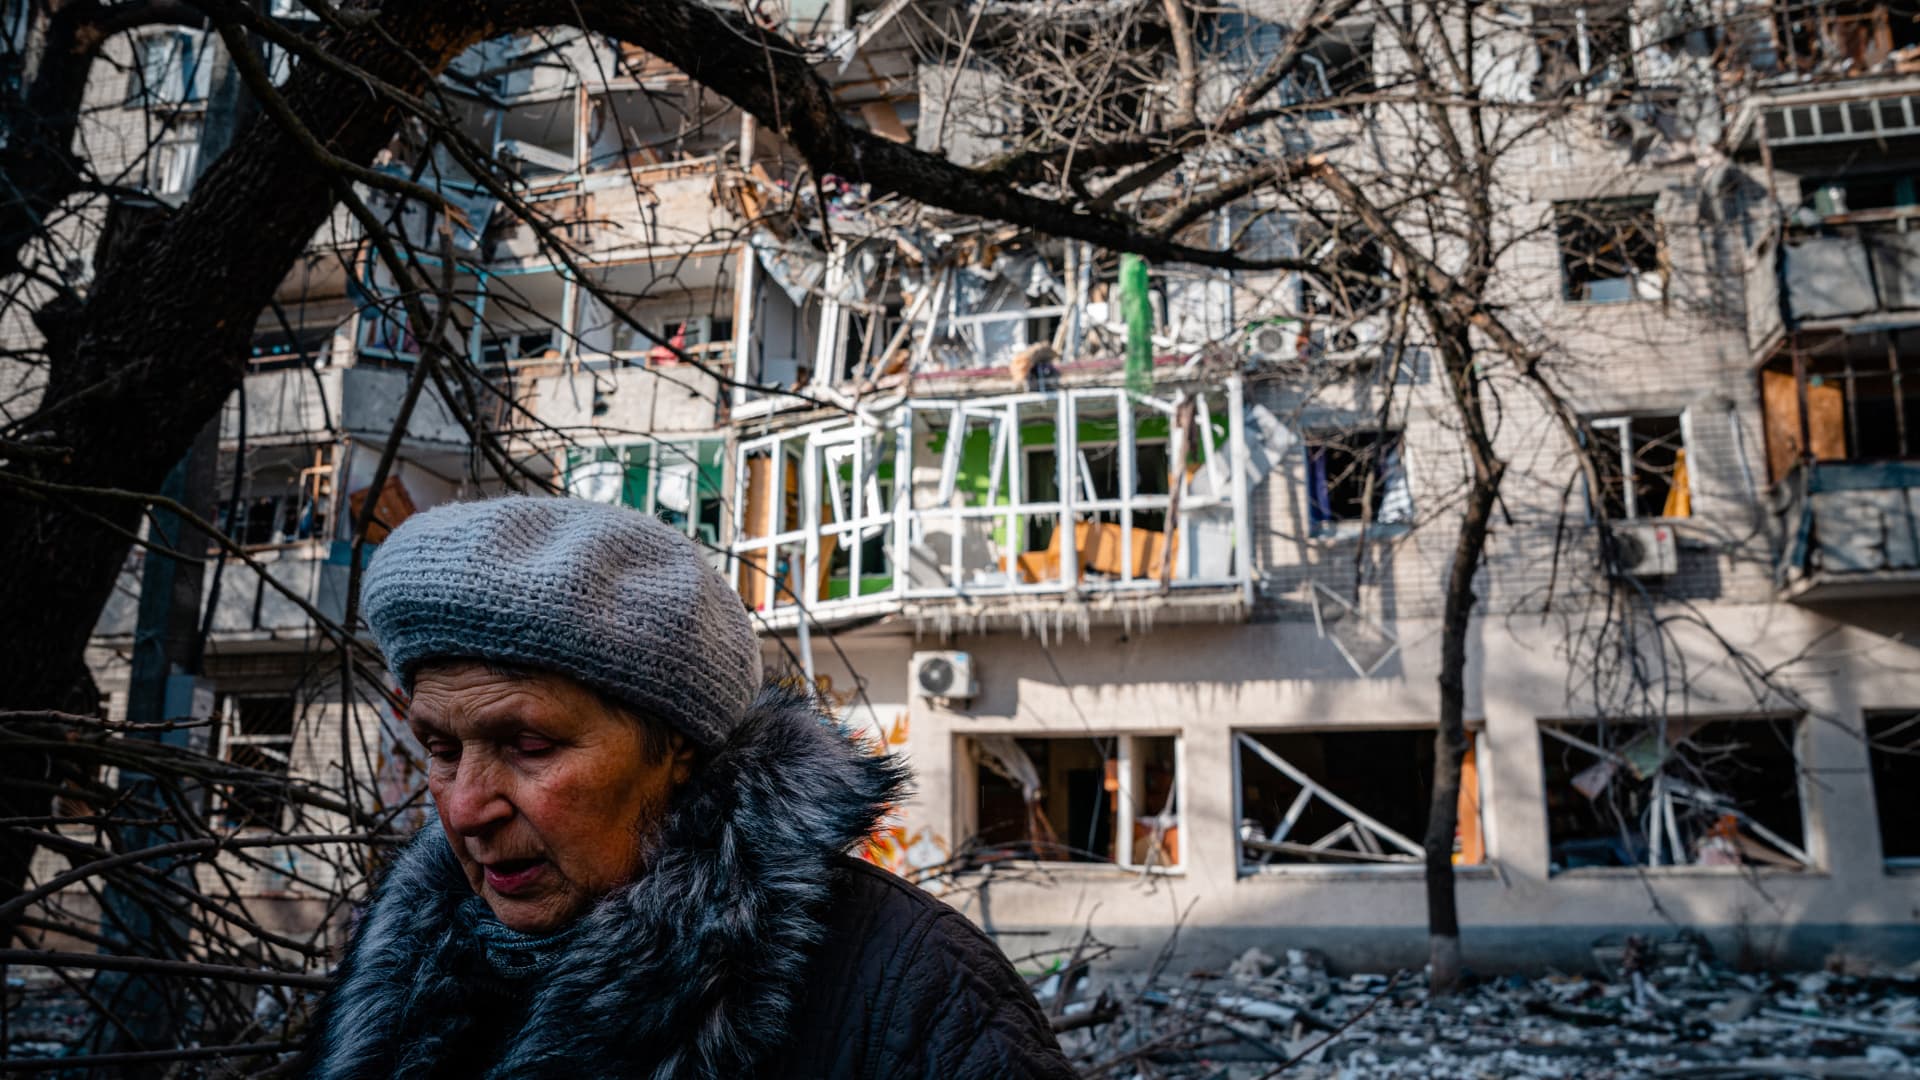 A pedestrian walks past a residential building damaged by Russian shelling in Kherson on December 20, 2022, amid the Russian invasion of Ukraine.